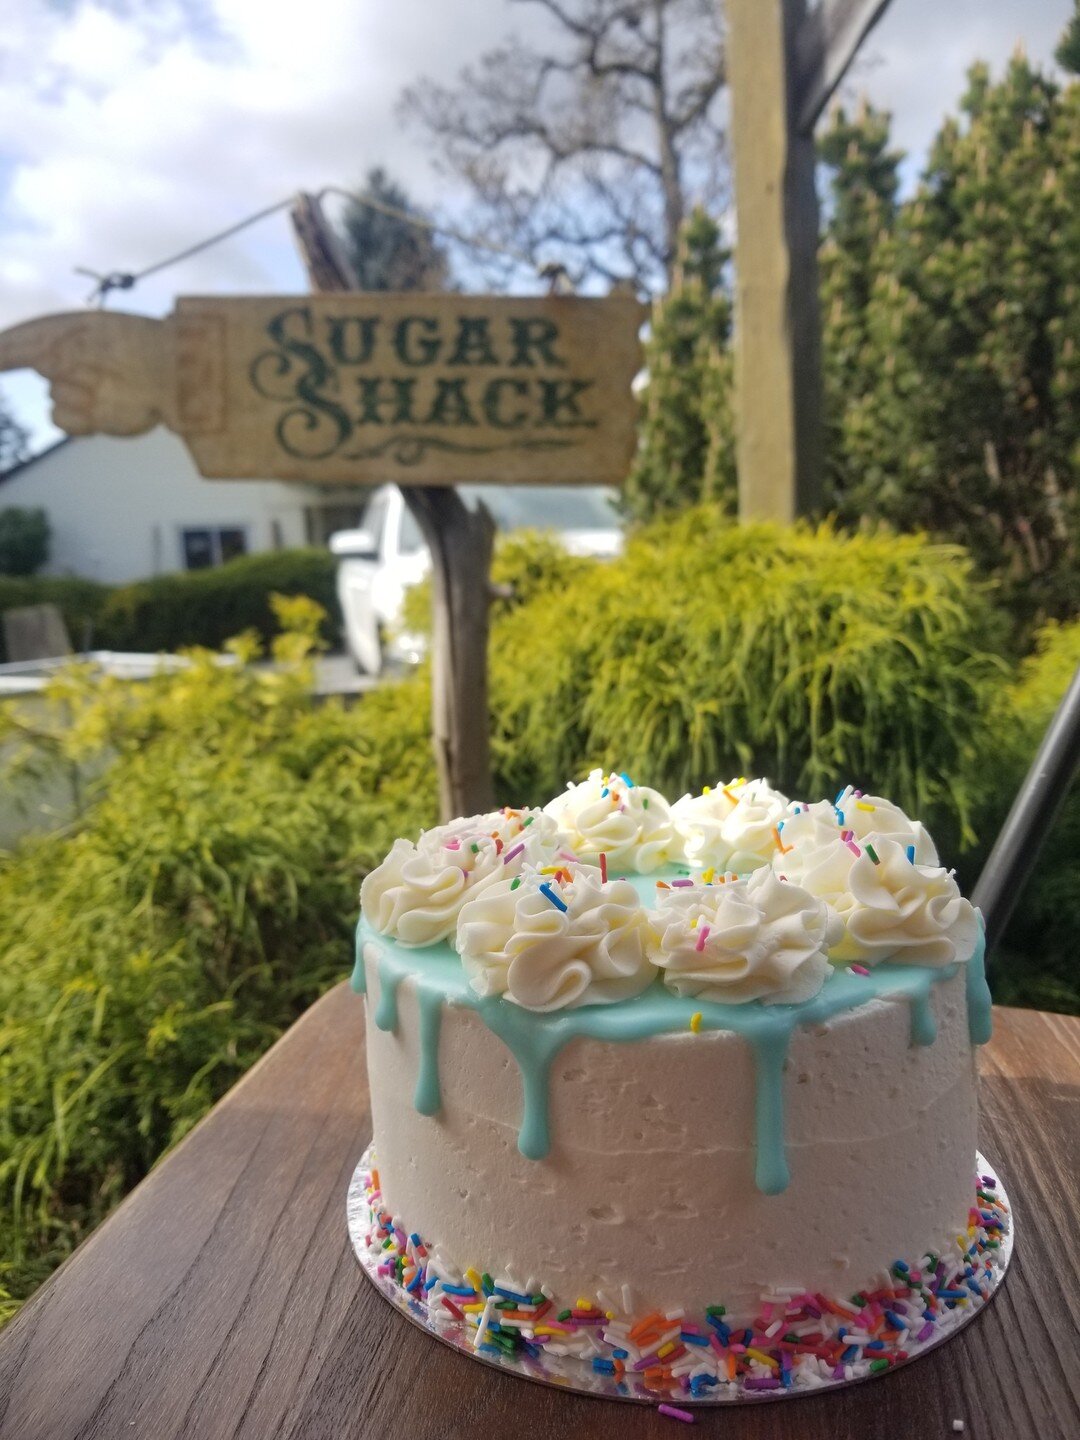 We now have online cake and bakery ordering! 

Go to www.mychosensugarshack.com to make your next event extra special with one of our custom cakes 🍰

#yyjcakes #yyjevents #birthdayparty #mychosencafe #sugarshack